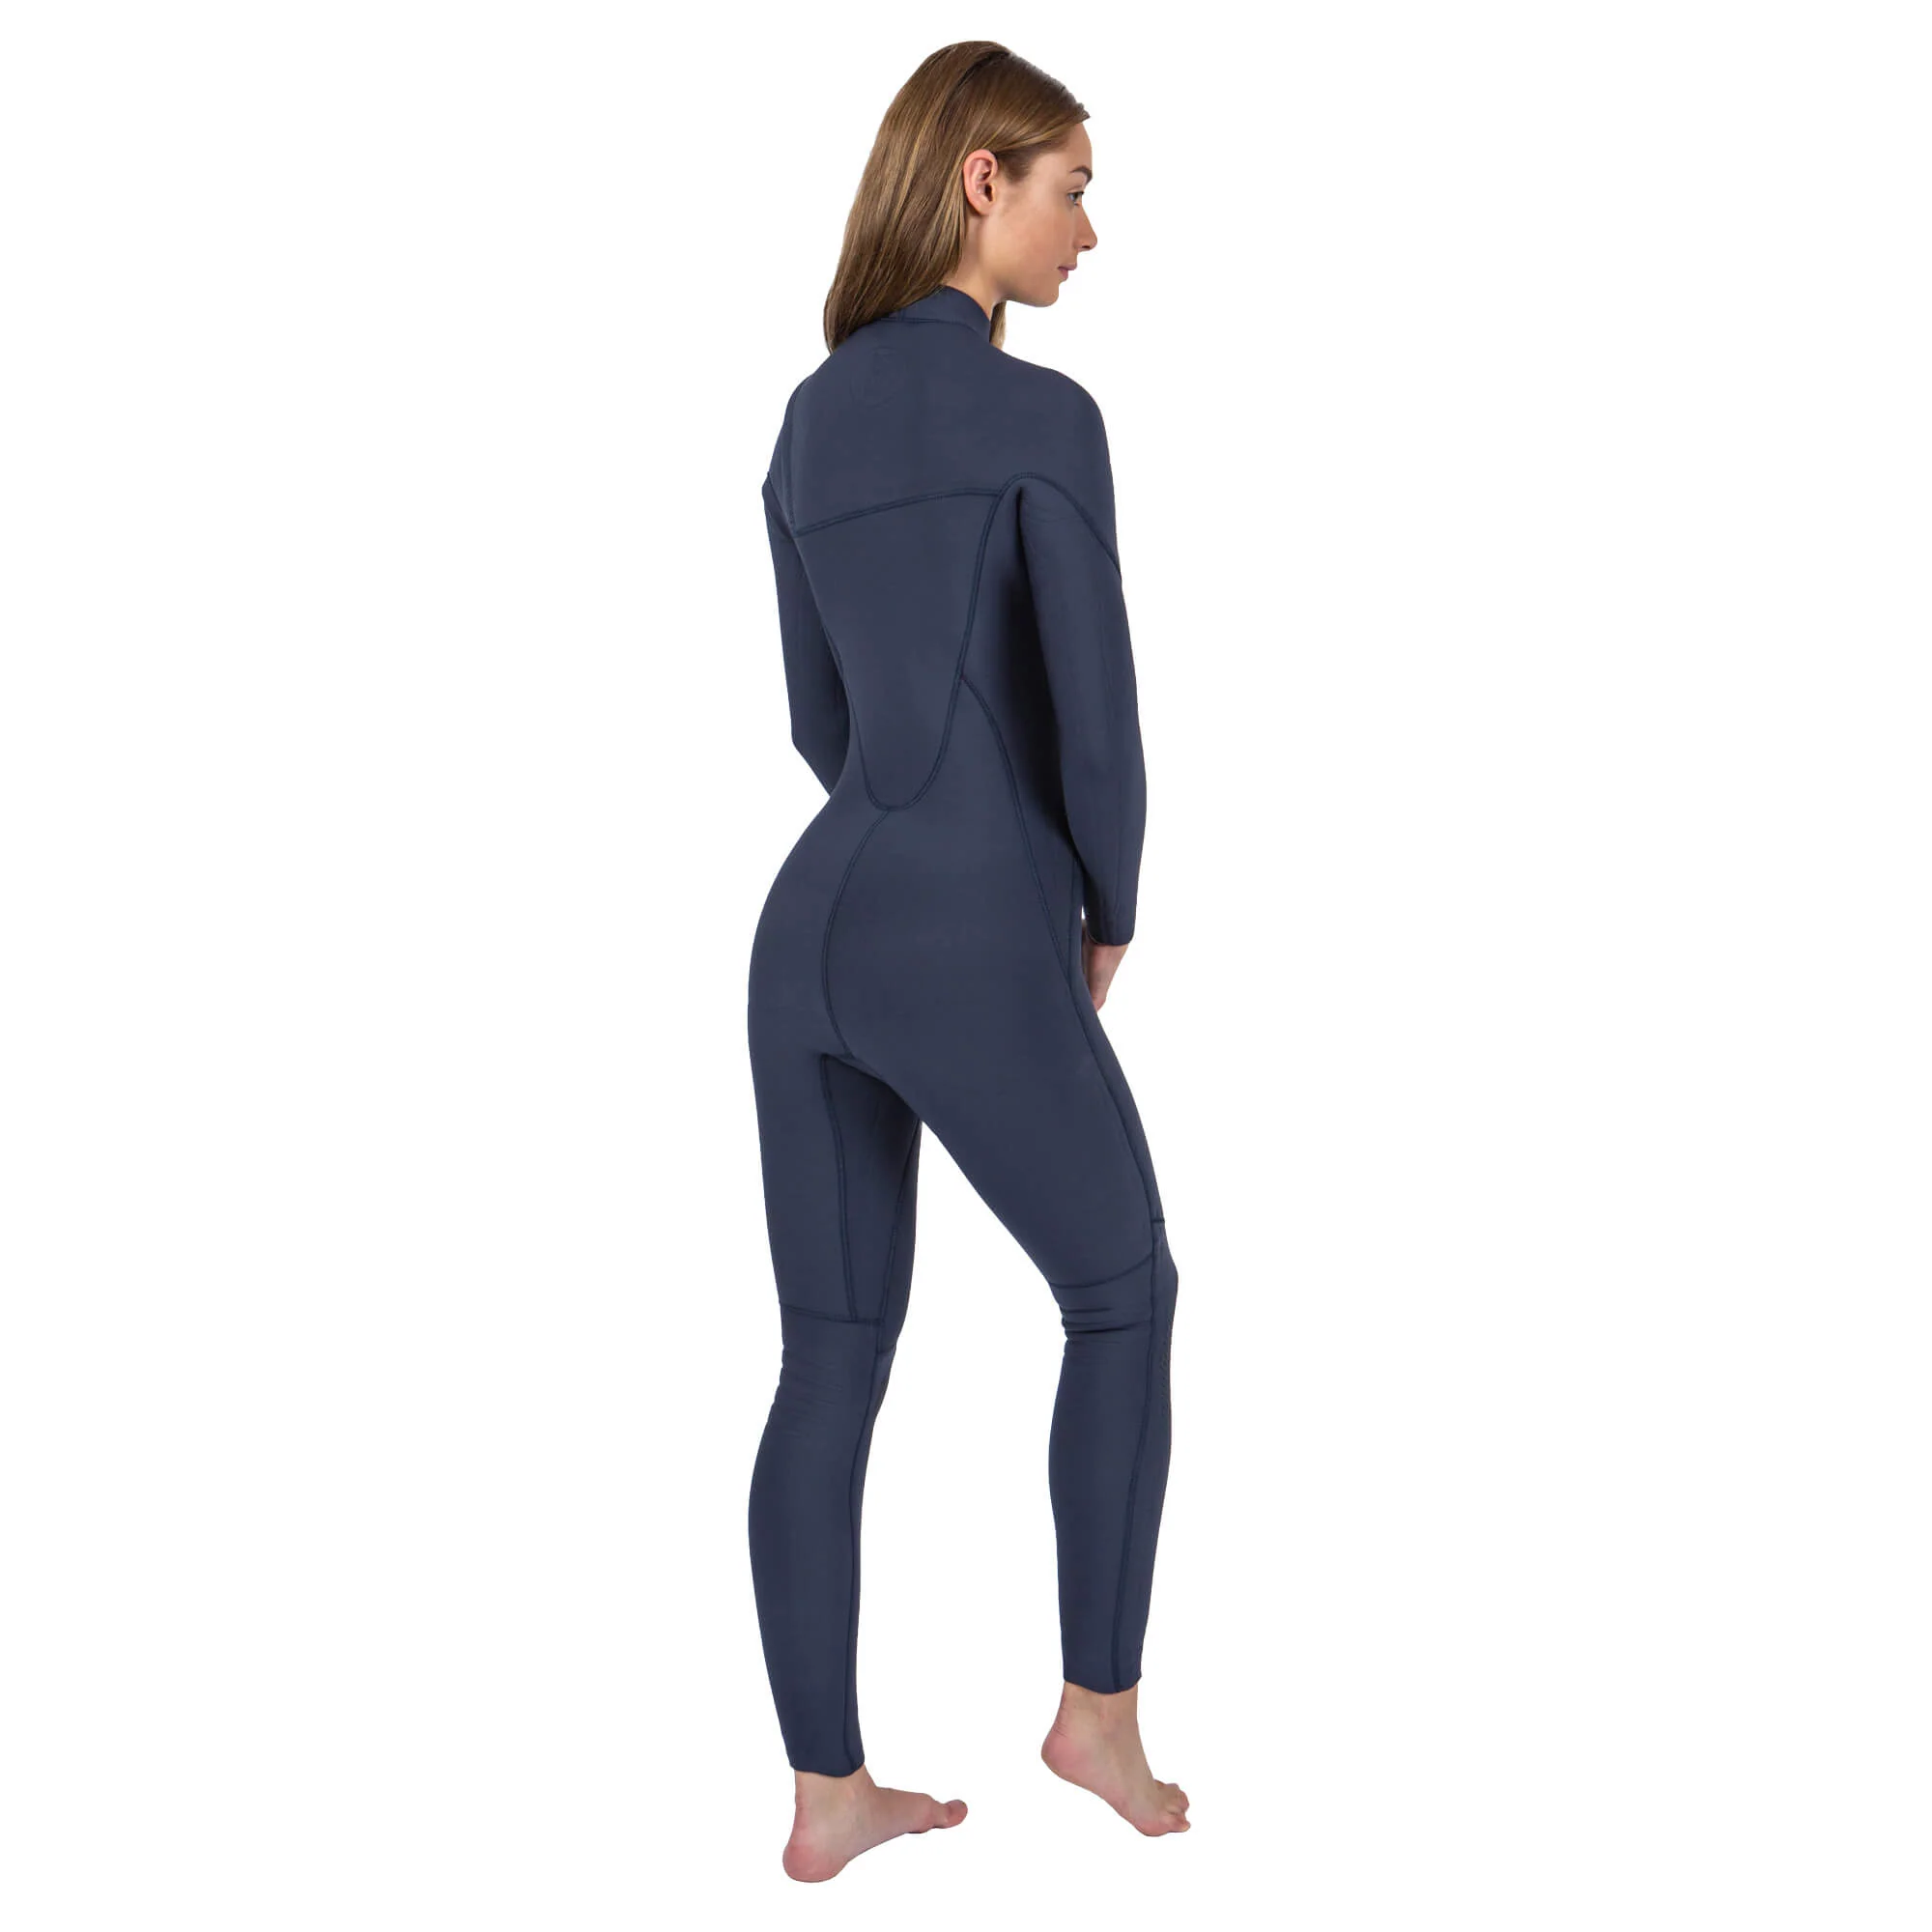 FOURTH ELEMENT WOMEN'S SURFACE 4/3MM WETSUIT